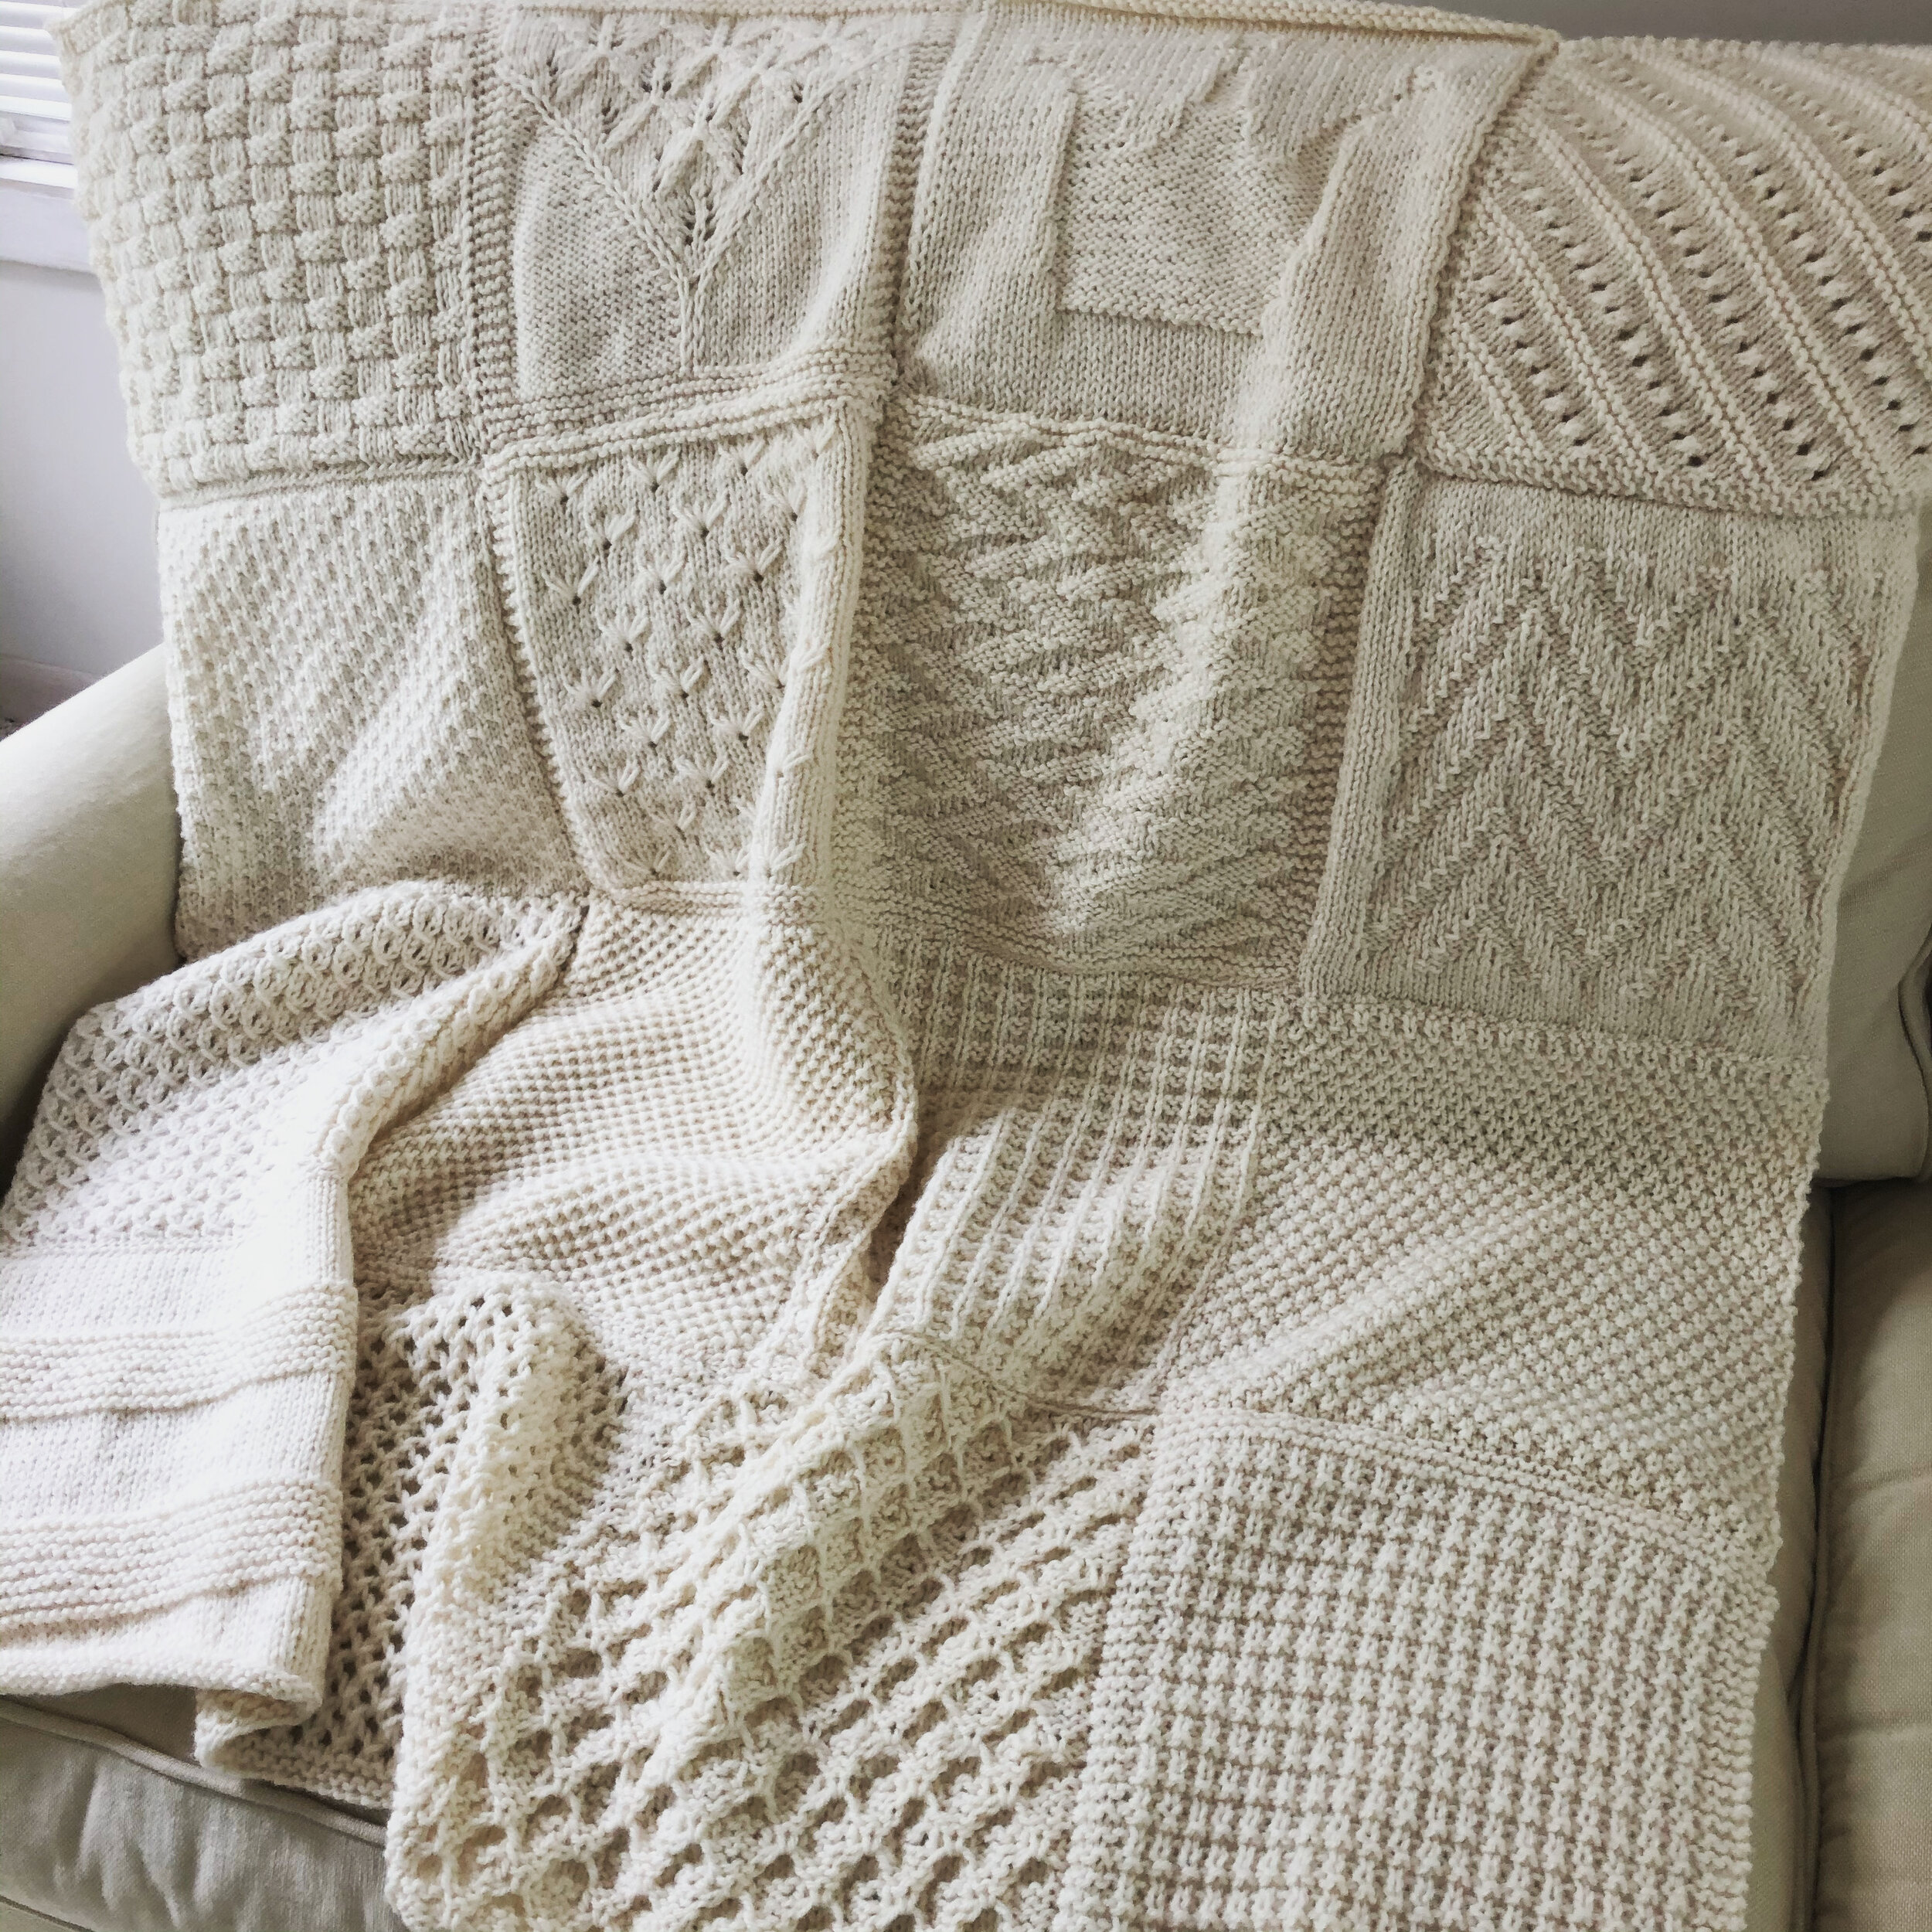 Ravelry: Cover Story Knit Blanket pattern by Stephanie Jessica Lau